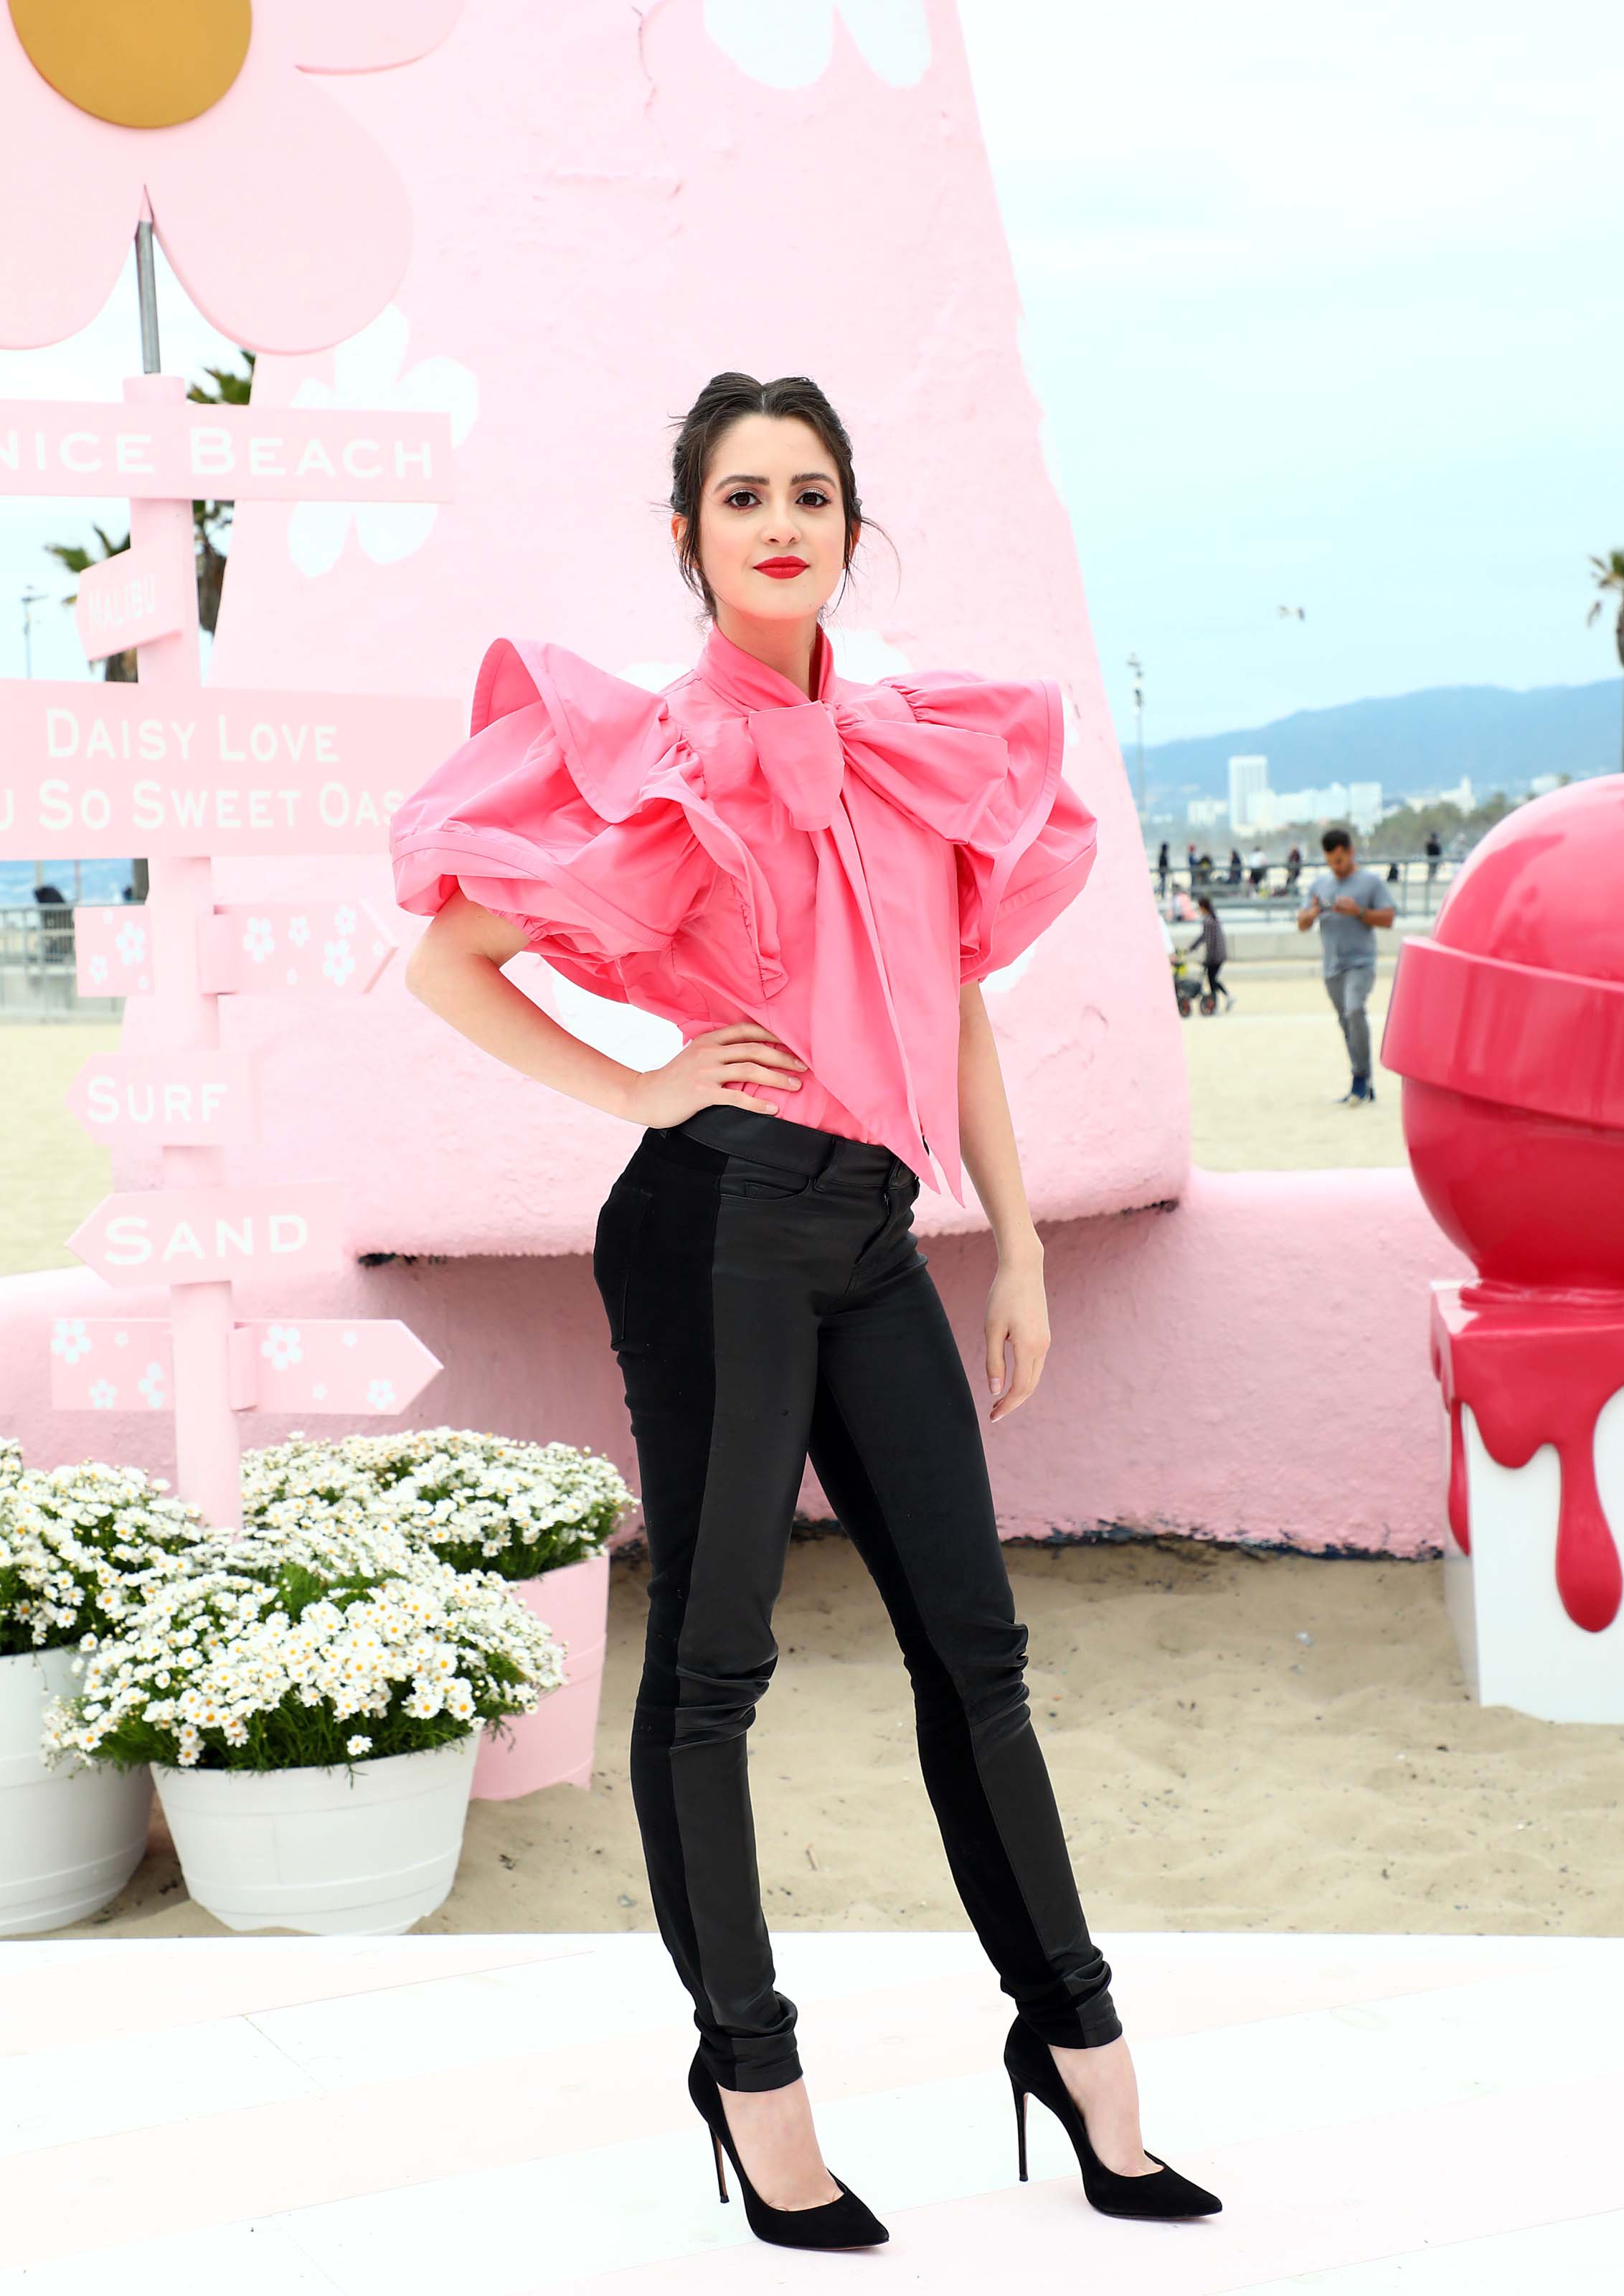 Laura Marano attends Marc Jacobs Daisy Love Eau So Sweet Fragrance Pop-Up Event